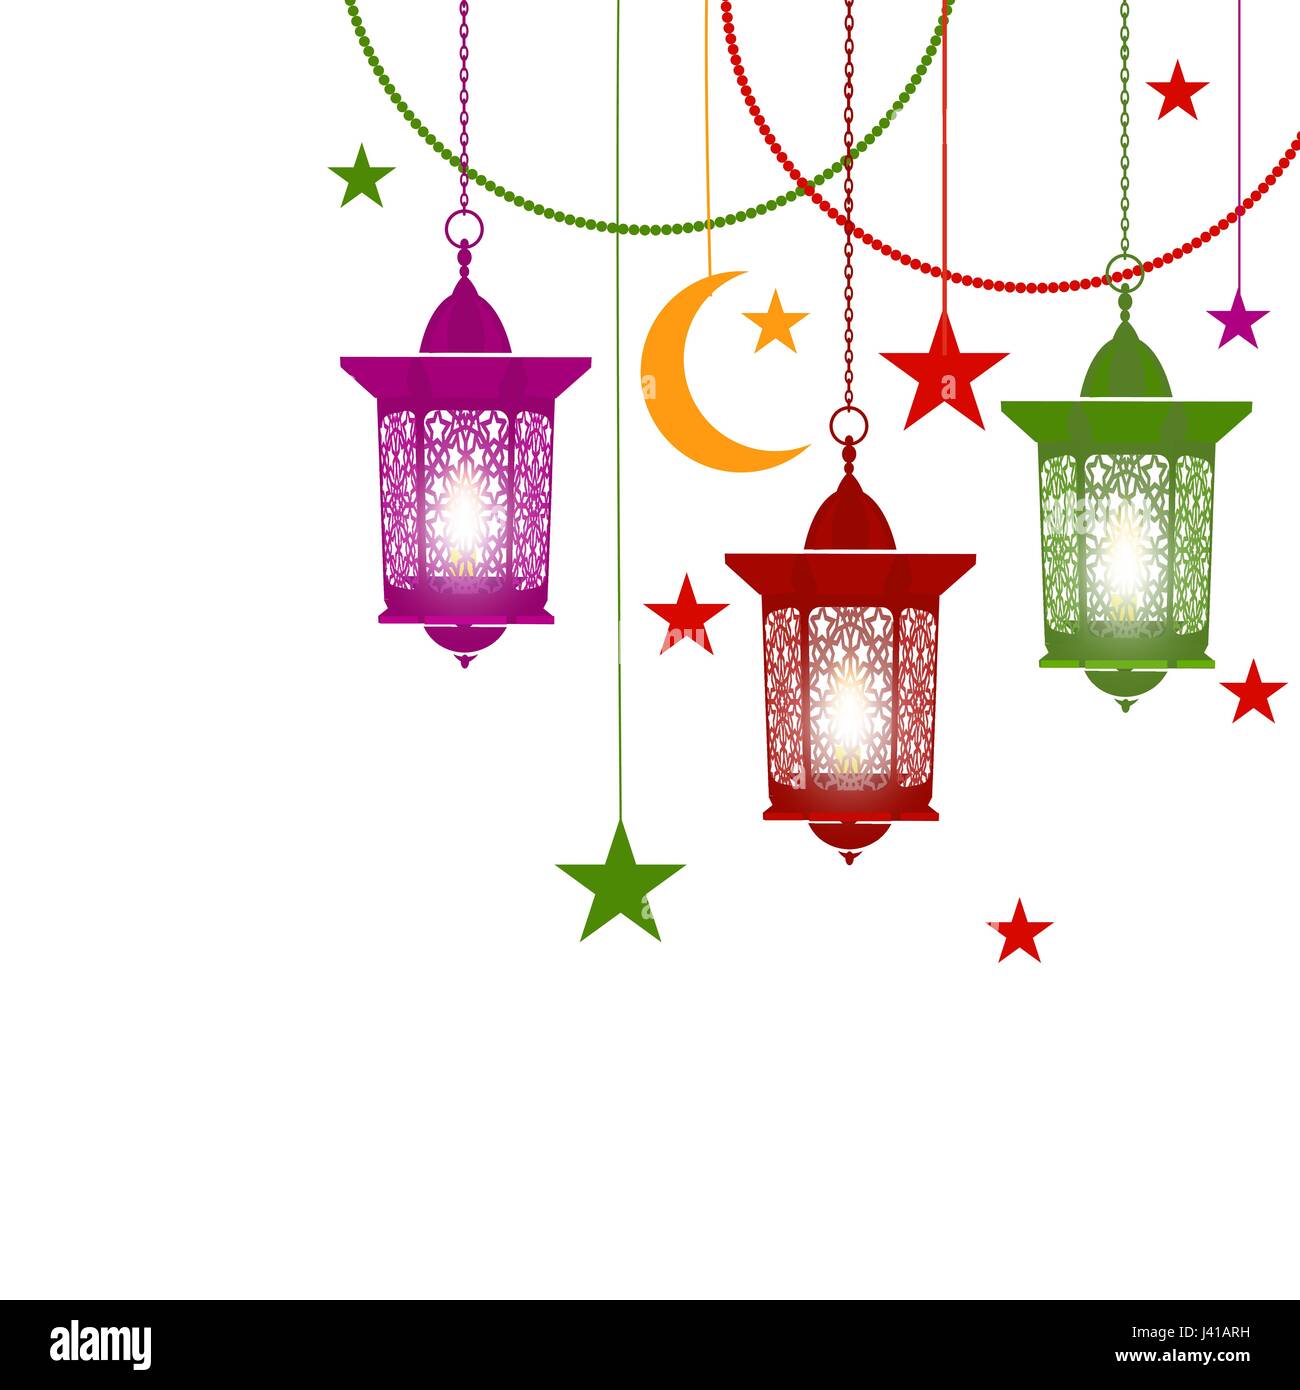 Ramadan Kareem Colorful Lanterns In Oriental Style On Chains With